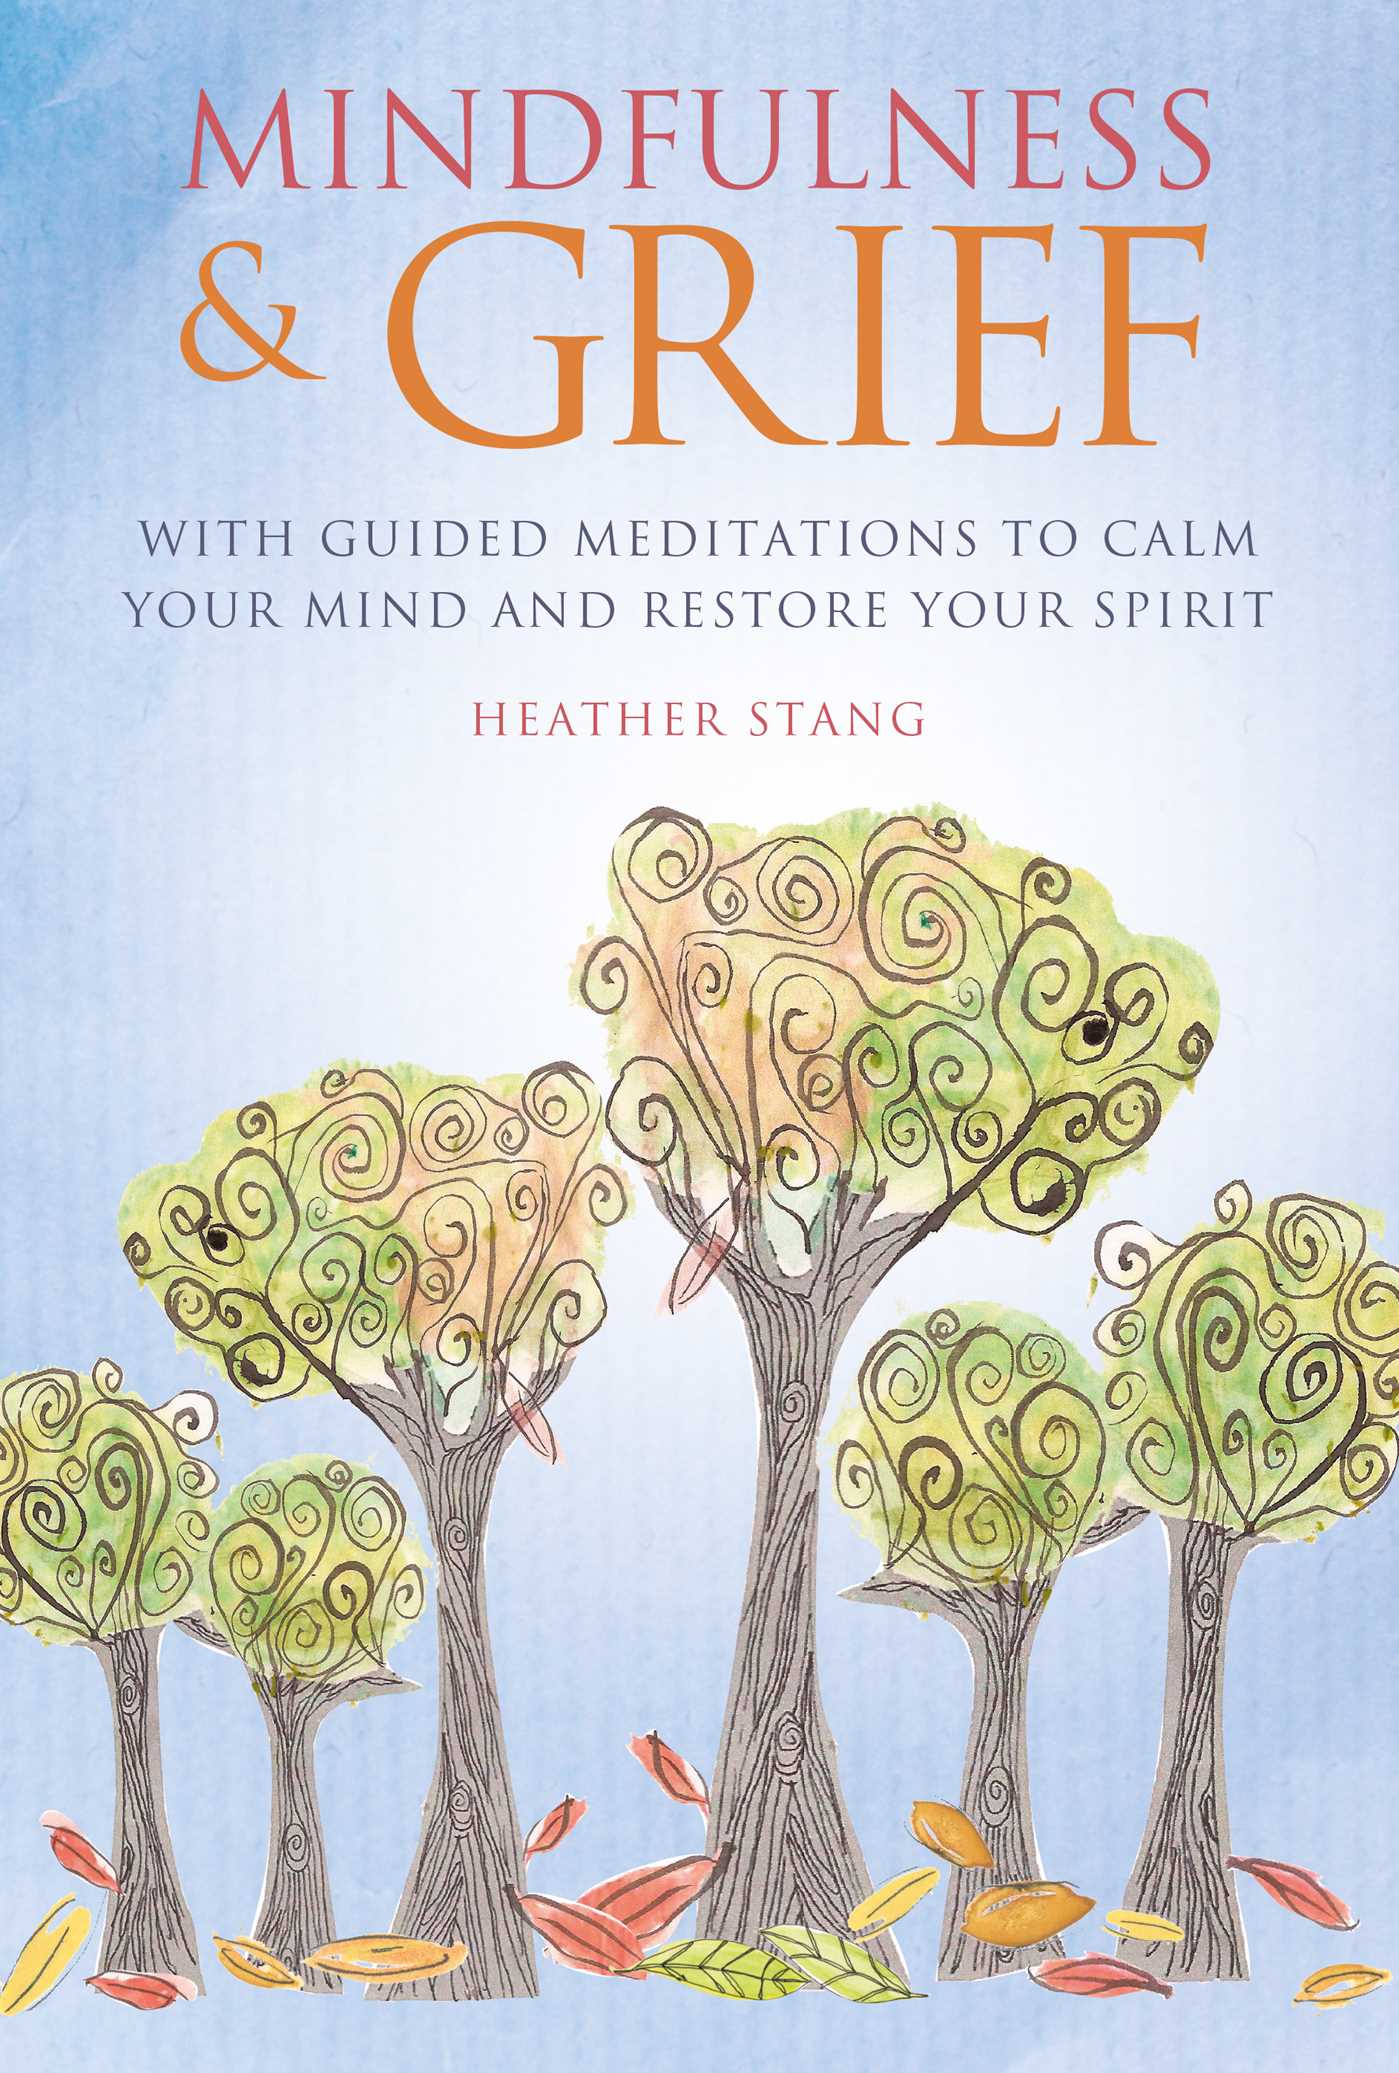 mindfulness-and-grief-book heather stang